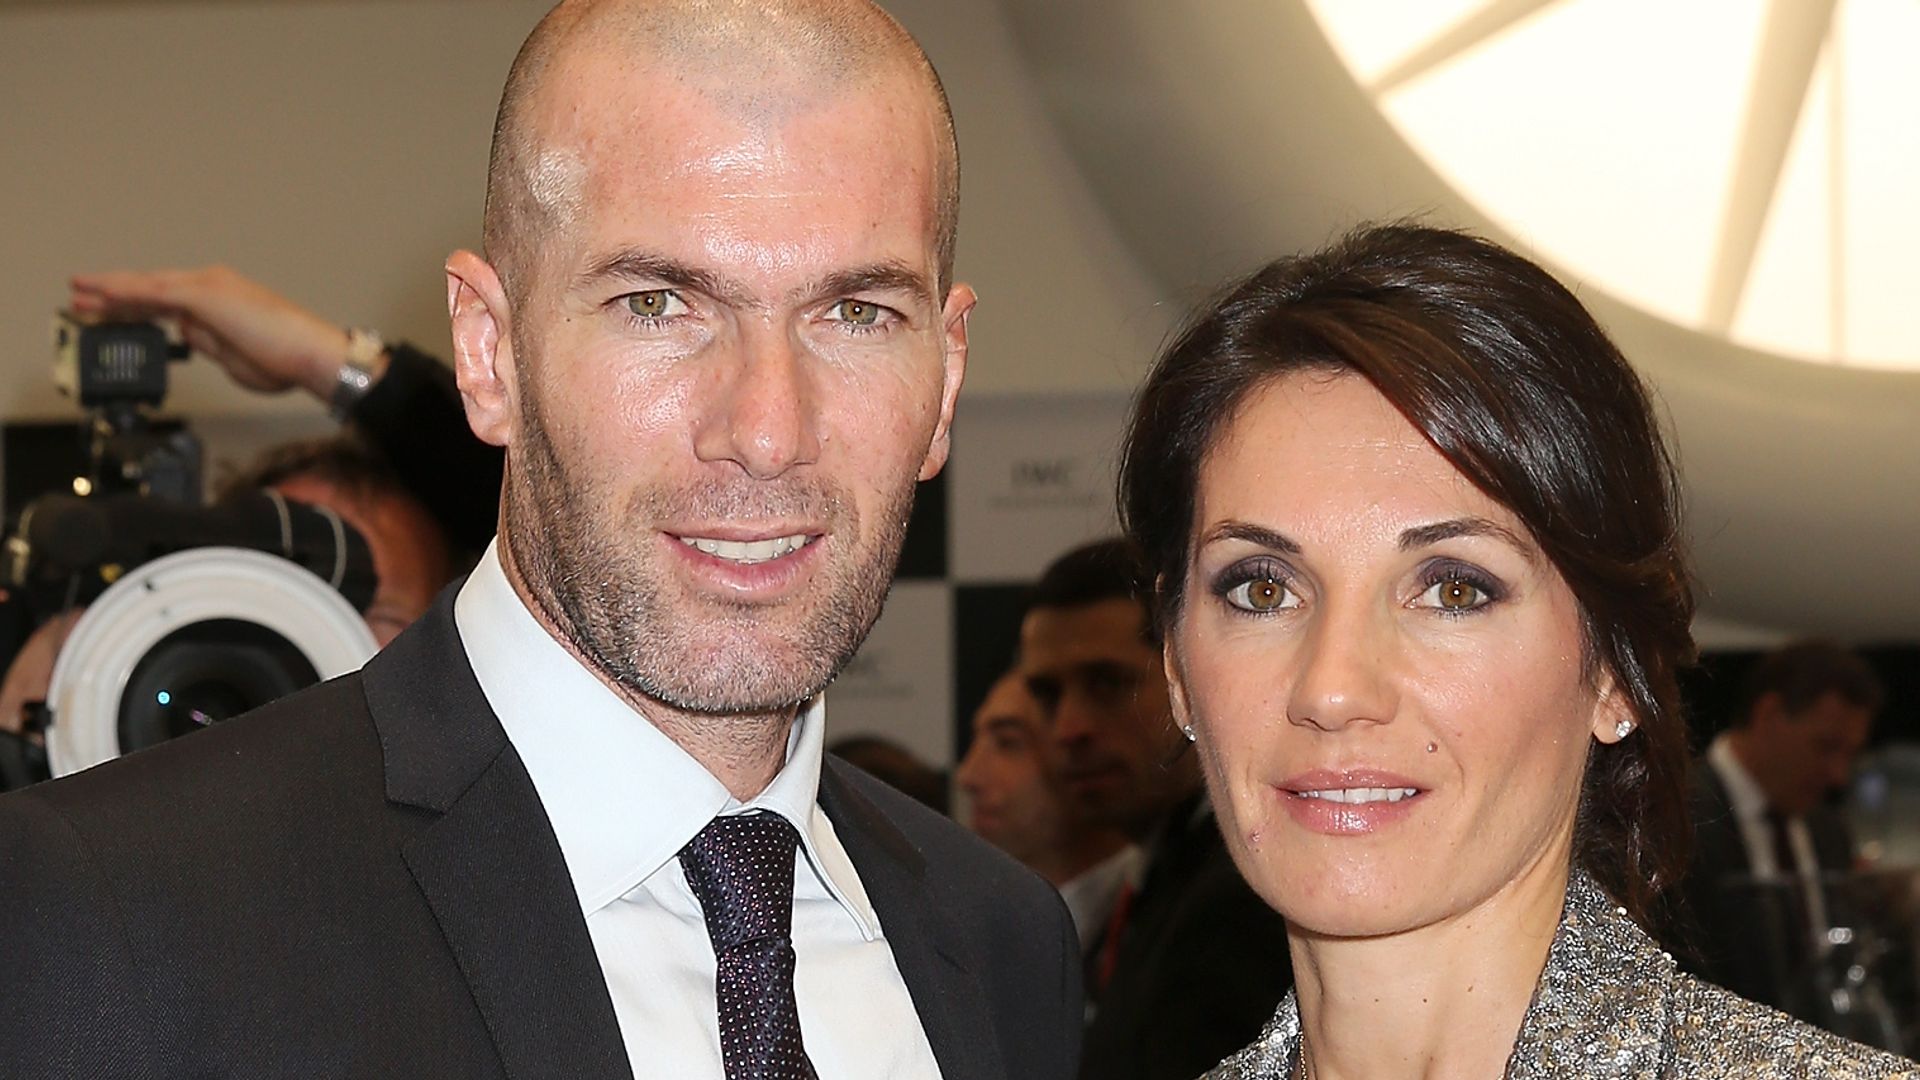 Zinedine Zidane in a suit and Veronique Zidane in a sparkly silver jacket